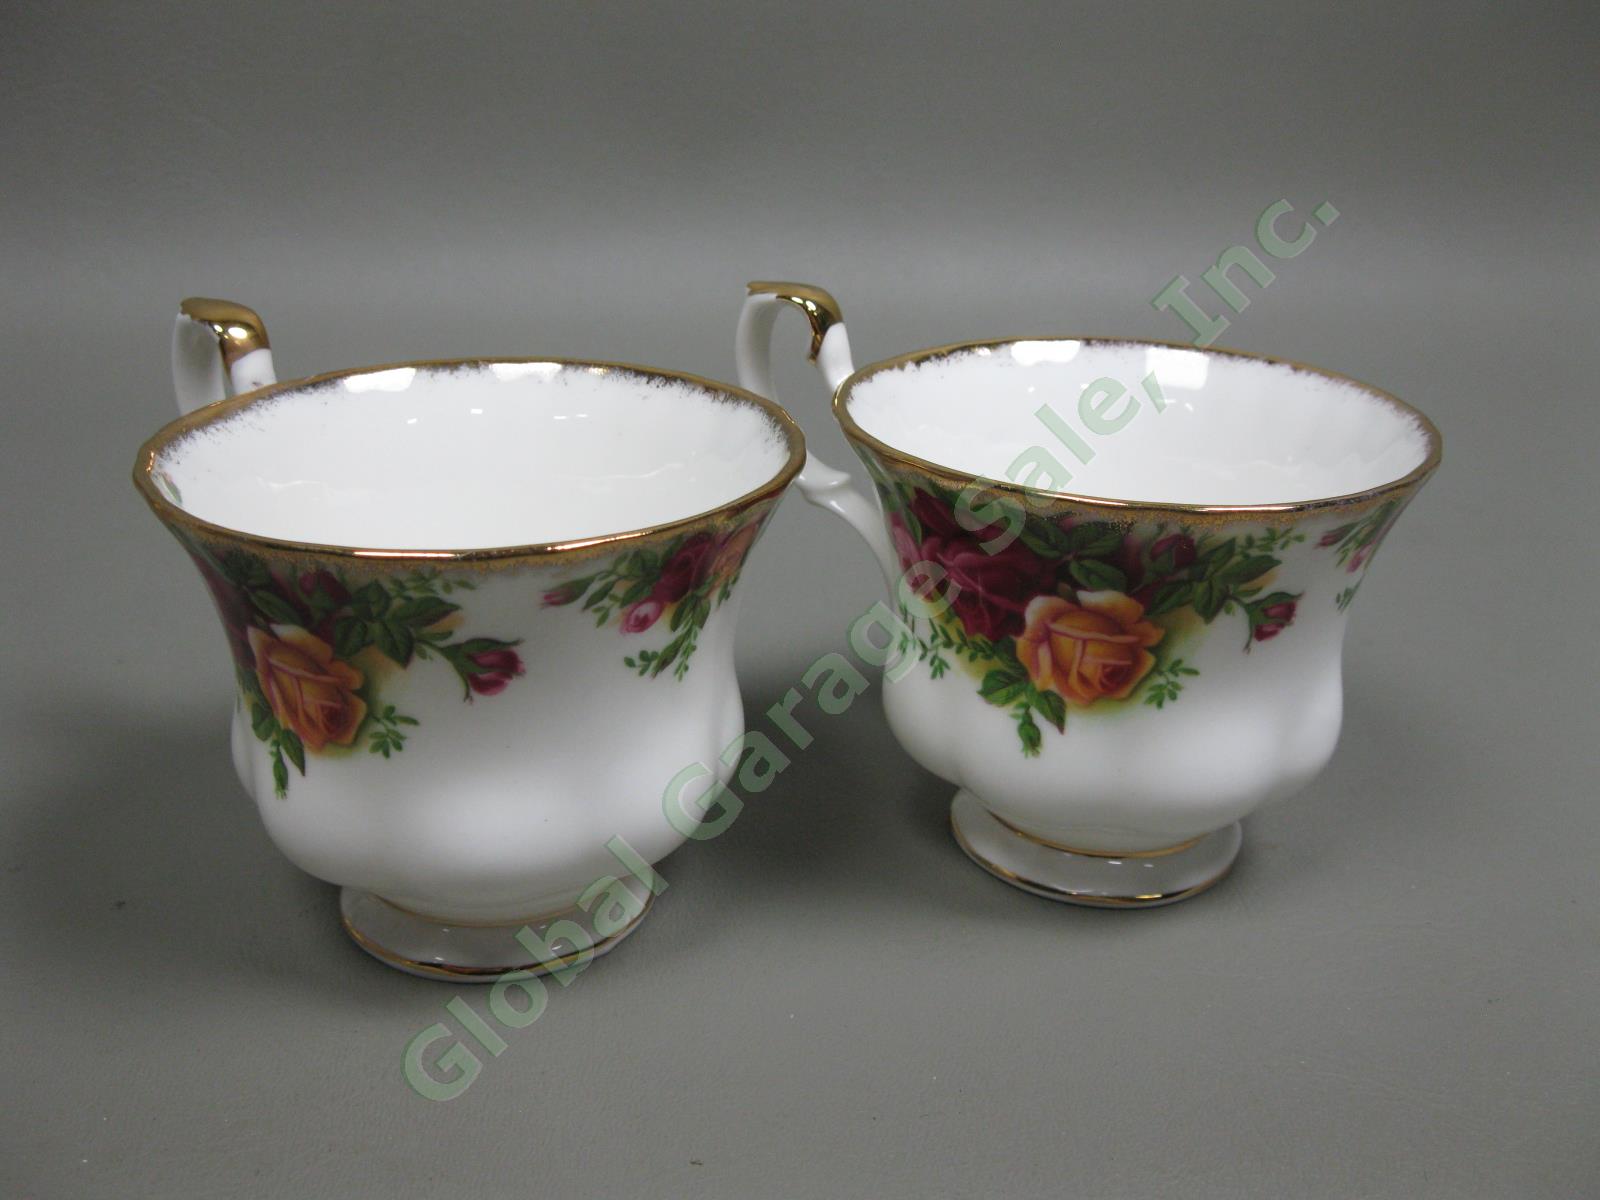 8 Royal Albert Old Country Roses Footed Tea Cup/Saucer Gold Trim Bone China Set 15